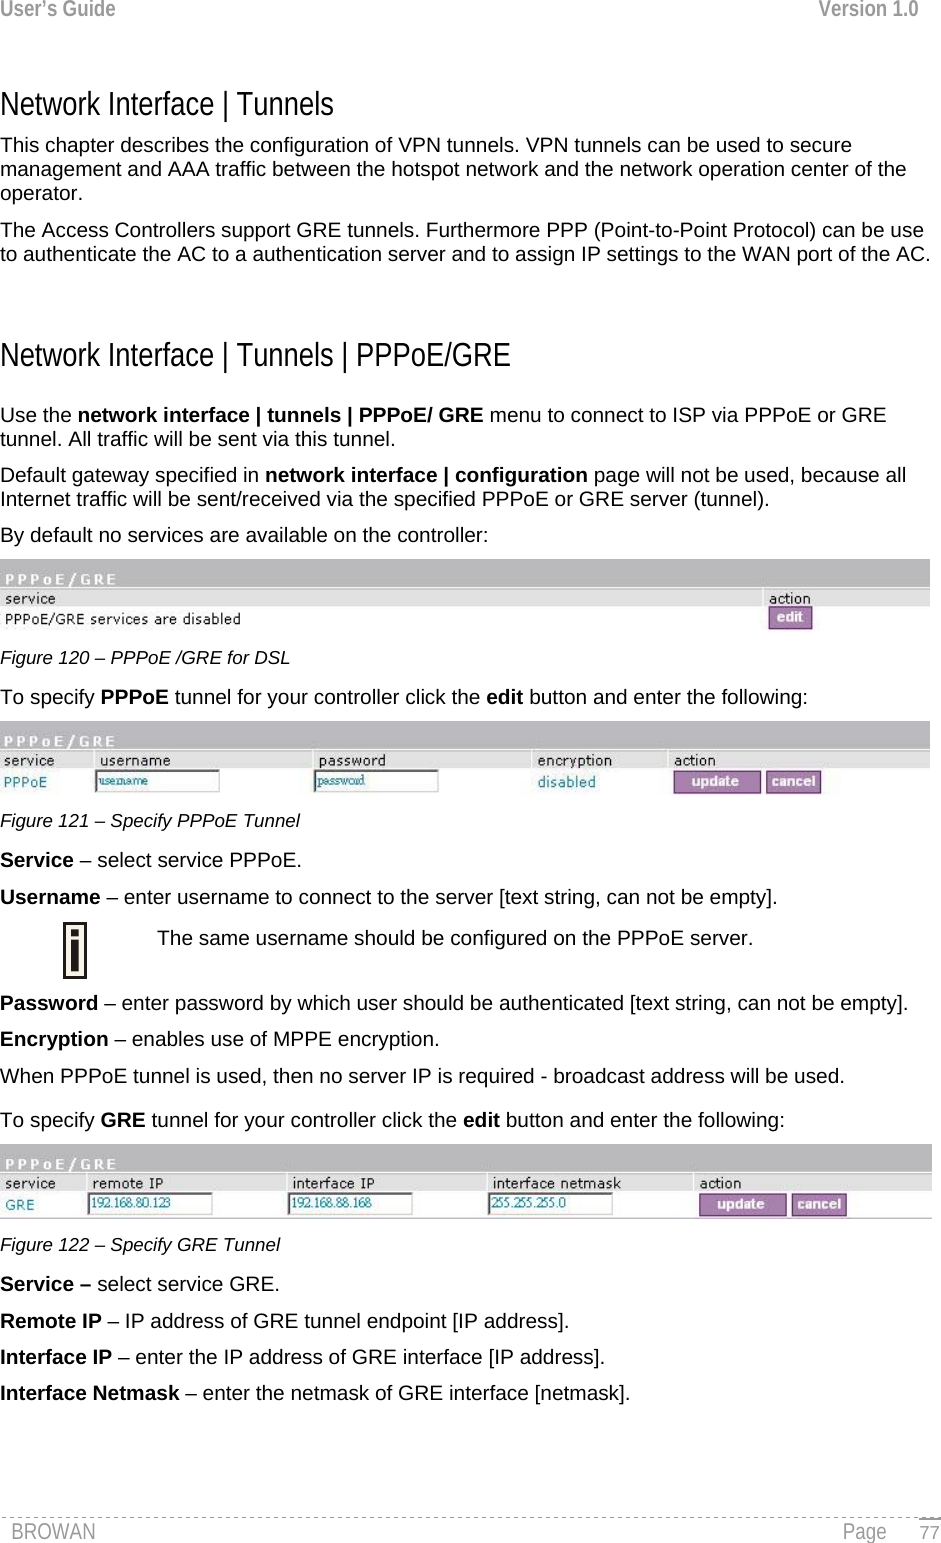 User’s Guide  Version 1.0  Network Interface | Tunnels  This chapter describes the configuration of VPN tunnels. VPN tunnels can be used to secure management and AAA traffic between the hotspot network and the network operation center of the operator. The Access Controllers support GRE tunnels. Furthermore PPP (Point-to-Point Protocol) can be use to authenticate the AC to a authentication server and to assign IP settings to the WAN port of the AC.  Network Interface | Tunnels | PPPoE/GRE Use the network interface | tunnels | PPPoE/ GRE menu to connect to ISP via PPPoE or GRE tunnel. All traffic will be sent via this tunnel.  Default gateway specified in network interface | configuration page will not be used, because all Internet traffic will be sent/received via the specified PPPoE or GRE server (tunnel). By default no services are available on the controller:  Figure 120 – PPPoE /GRE for DSL To specify PPPoE tunnel for your controller click the edit button and enter the following:  Figure 121 – Specify PPPoE Tunnel Service – select service PPPoE. Username – enter username to connect to the server [text string, can not be empty].  The same username should be configured on the PPPoE server. Password – enter password by which user should be authenticated [text string, can not be empty]. Encryption – enables use of MPPE encryption. When PPPoE tunnel is used, then no server IP is required - broadcast address will be used. To specify GRE tunnel for your controller click the edit button and enter the following:  Figure 122 – Specify GRE Tunnel Service – select service GRE. Remote IP – IP address of GRE tunnel endpoint [IP address]. Interface IP – enter the IP address of GRE interface [IP address].  Interface Netmask – enter the netmask of GRE interface [netmask]. BROWAN                                                                                                                                               Page   77